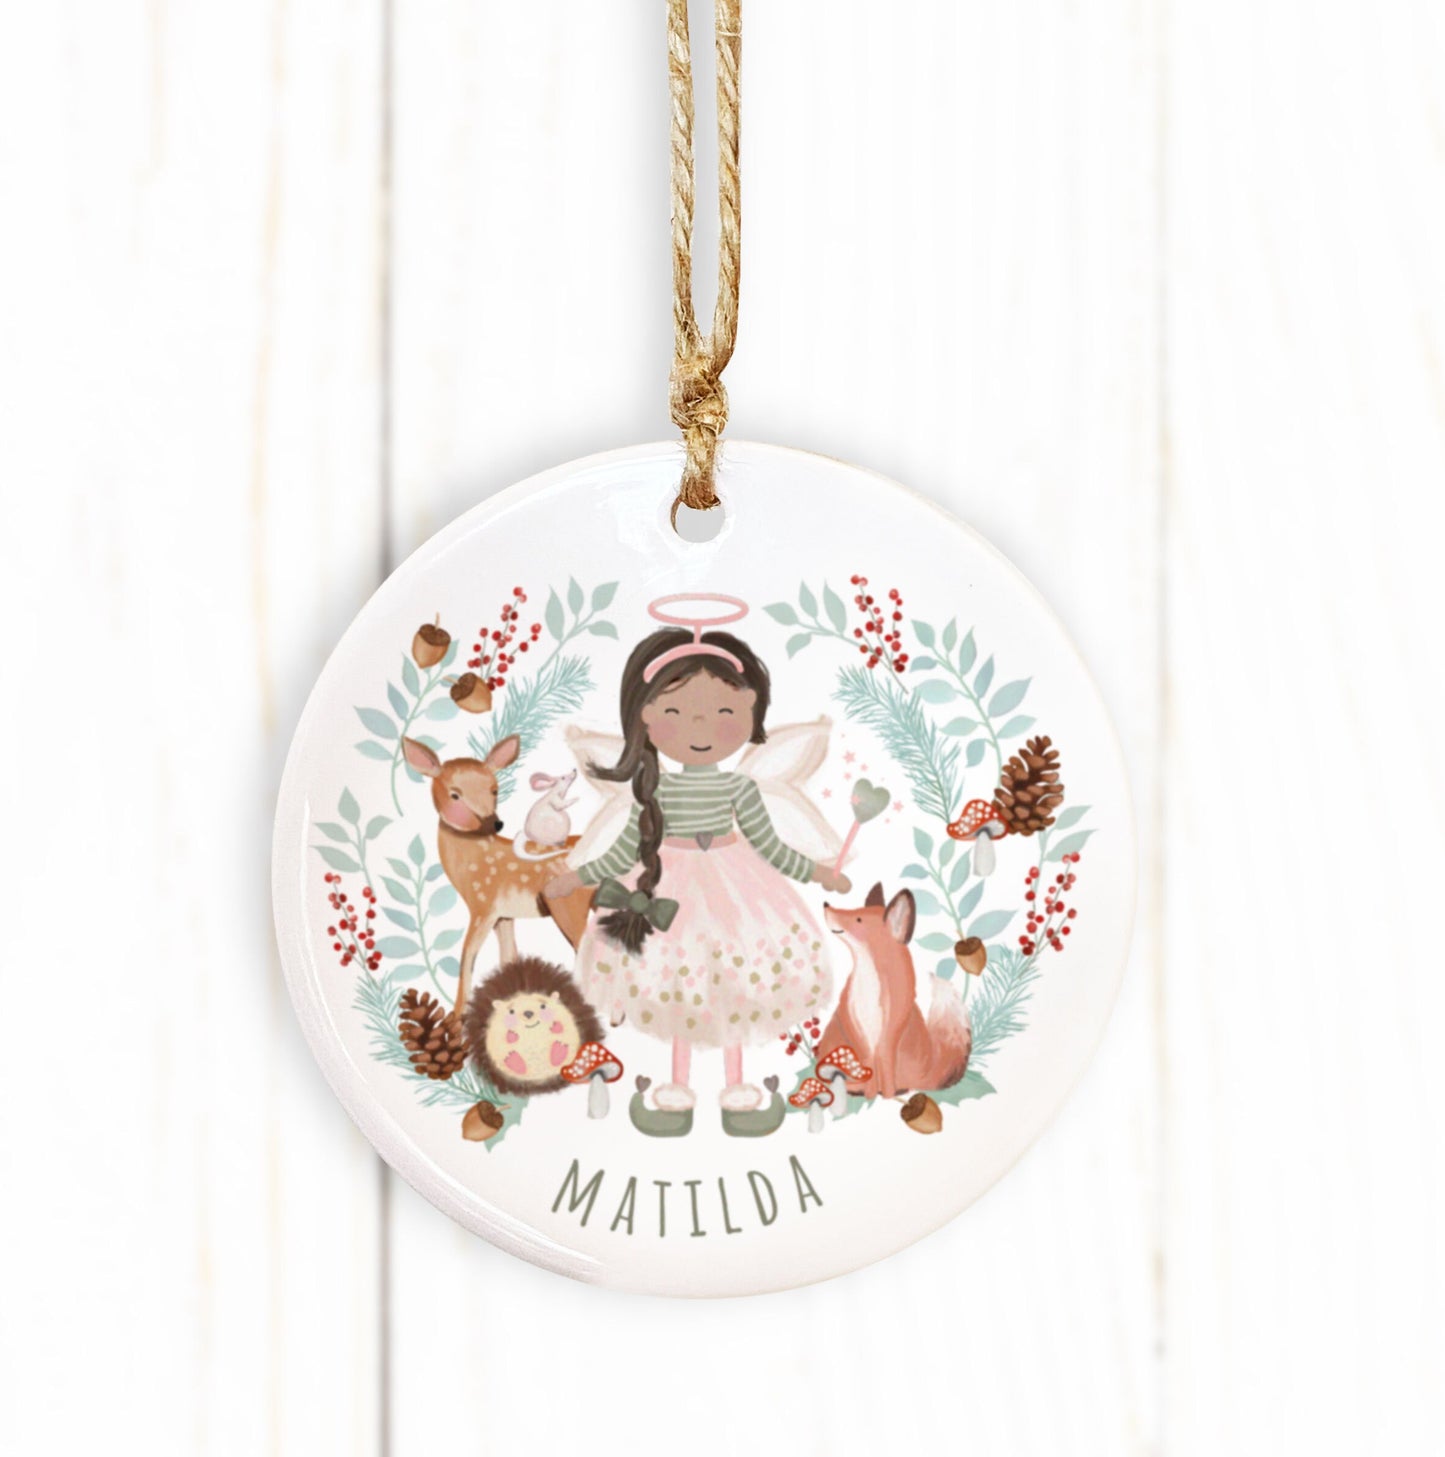 Personalised Woodland Christmas Fairy Bauble. Any skin tone and hair colour Fairy. Personalised Christmas Tree Decoration.